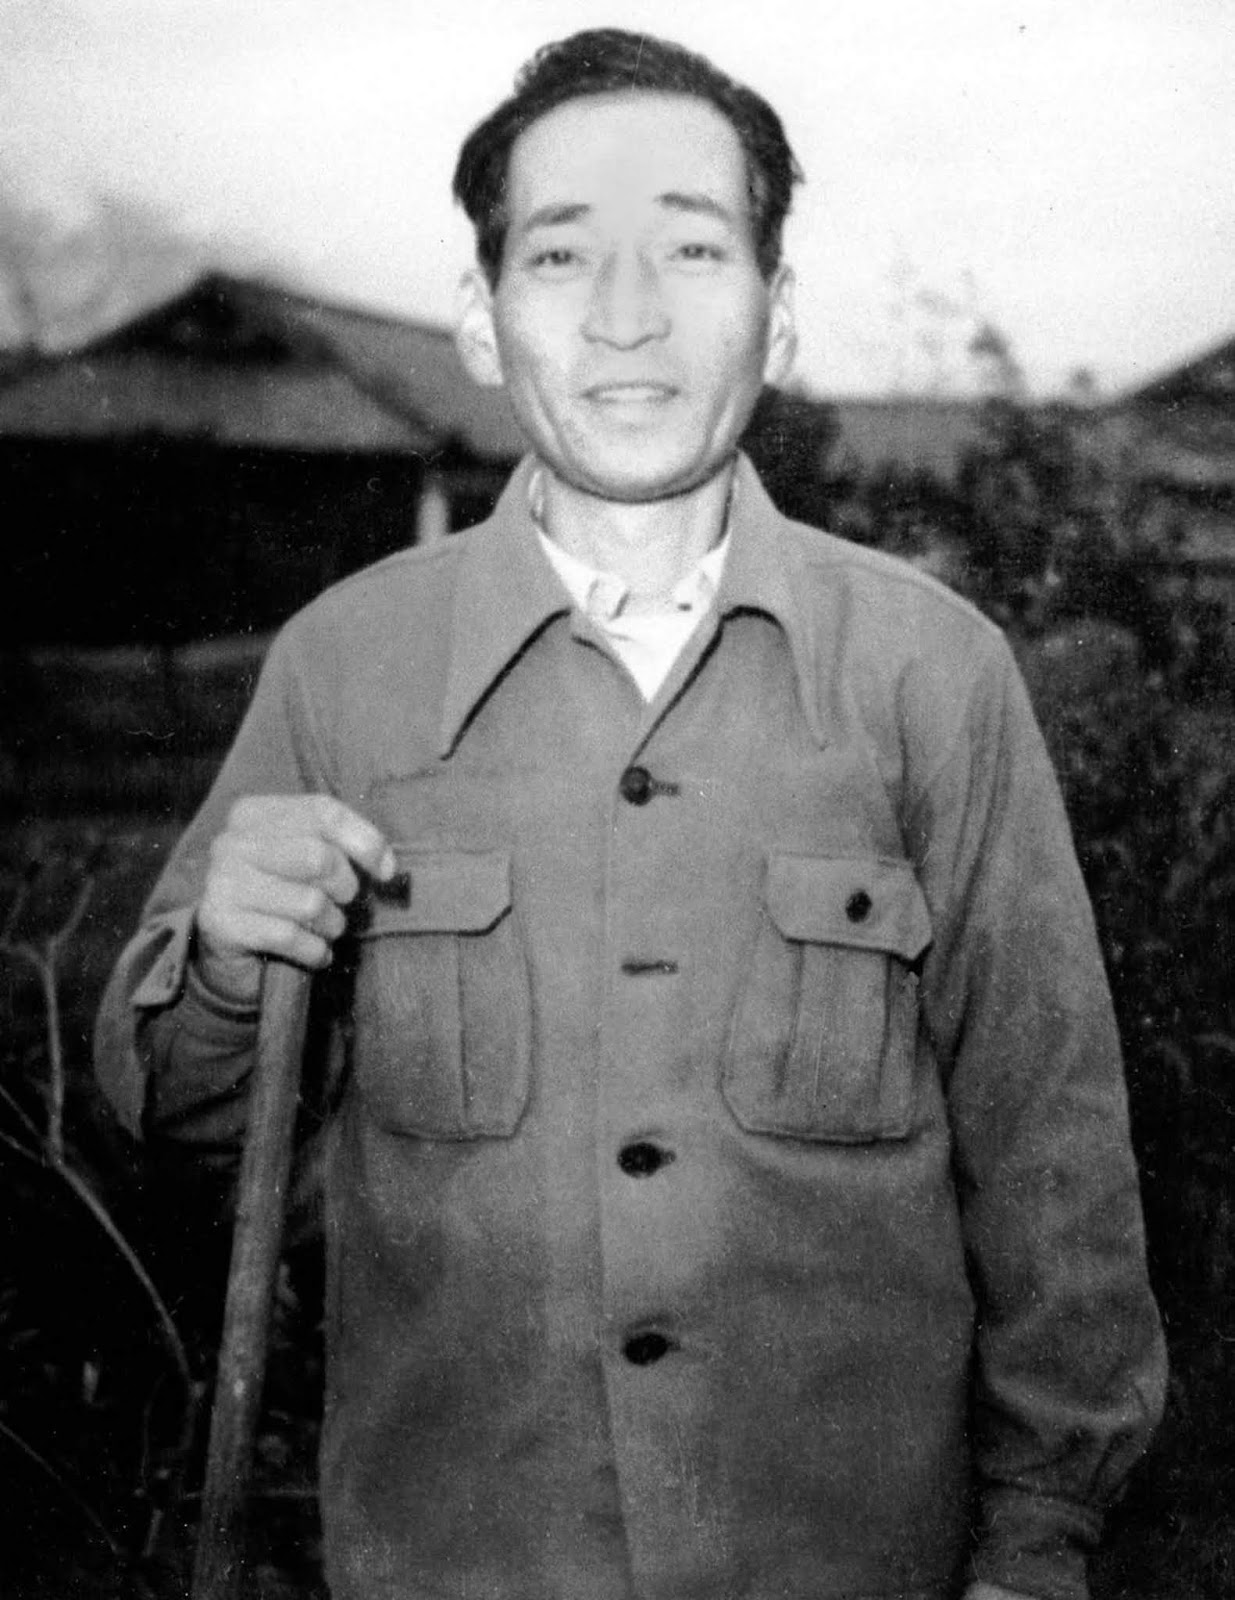 Mitsuo Fuchida, who led the first wave of the air attack. He later served in the Battle of Midway, and missed the atomic bombing of Hiroshima by a single day. After the war, he converted to Christianity and traveled the United States and Europe as an evangelist.